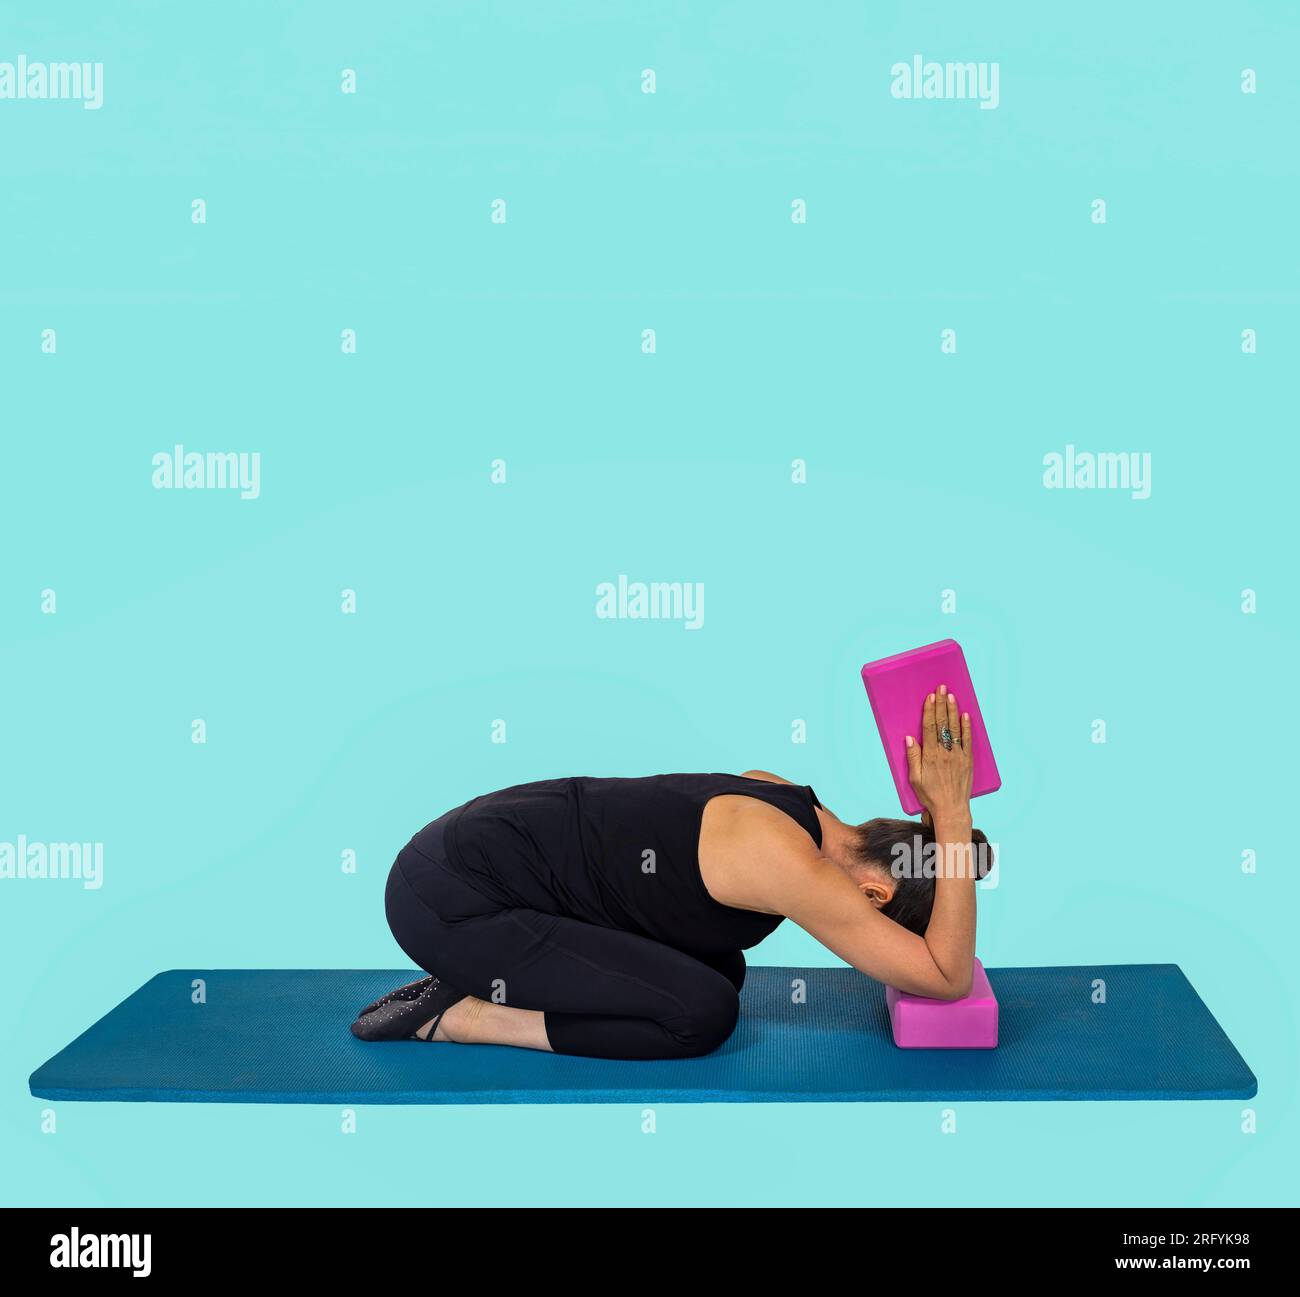 Trauma releasing exercises, senior citizen woman in her sixties, performing body strength and recovery exercises on a mat Stock Photo